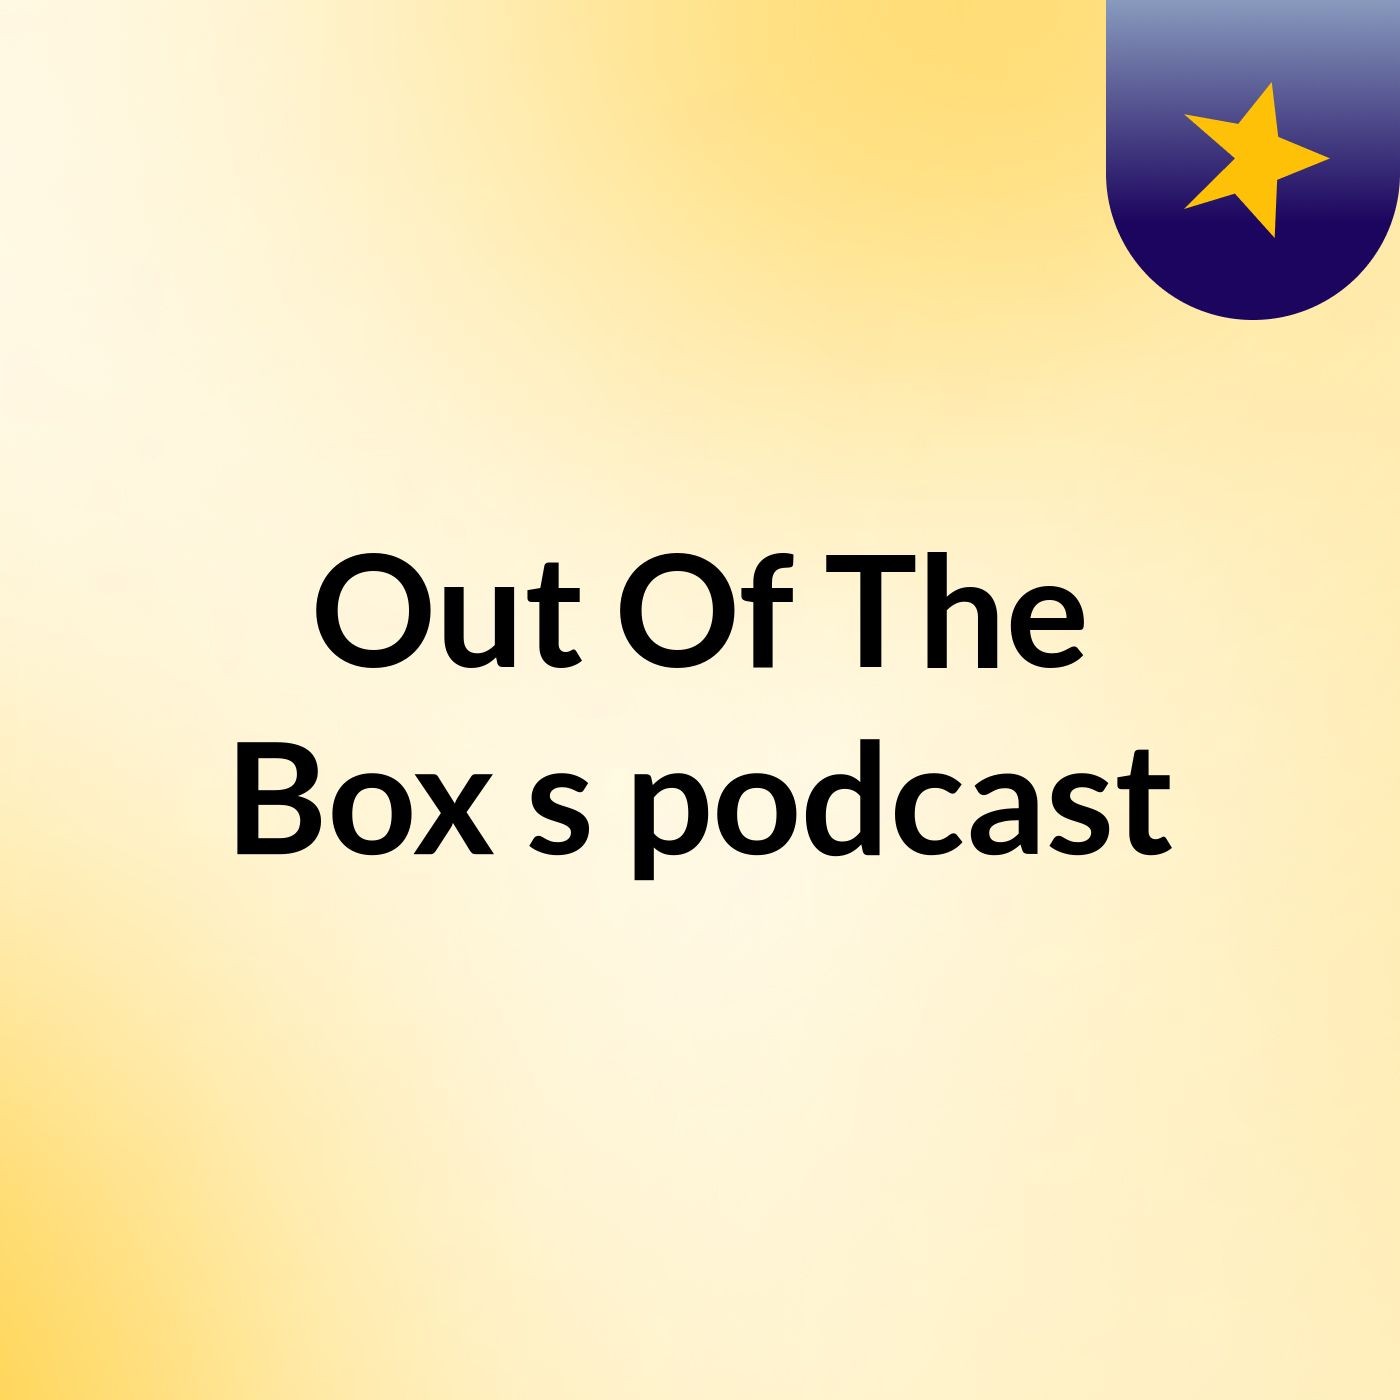 Out Of The Box's podcast